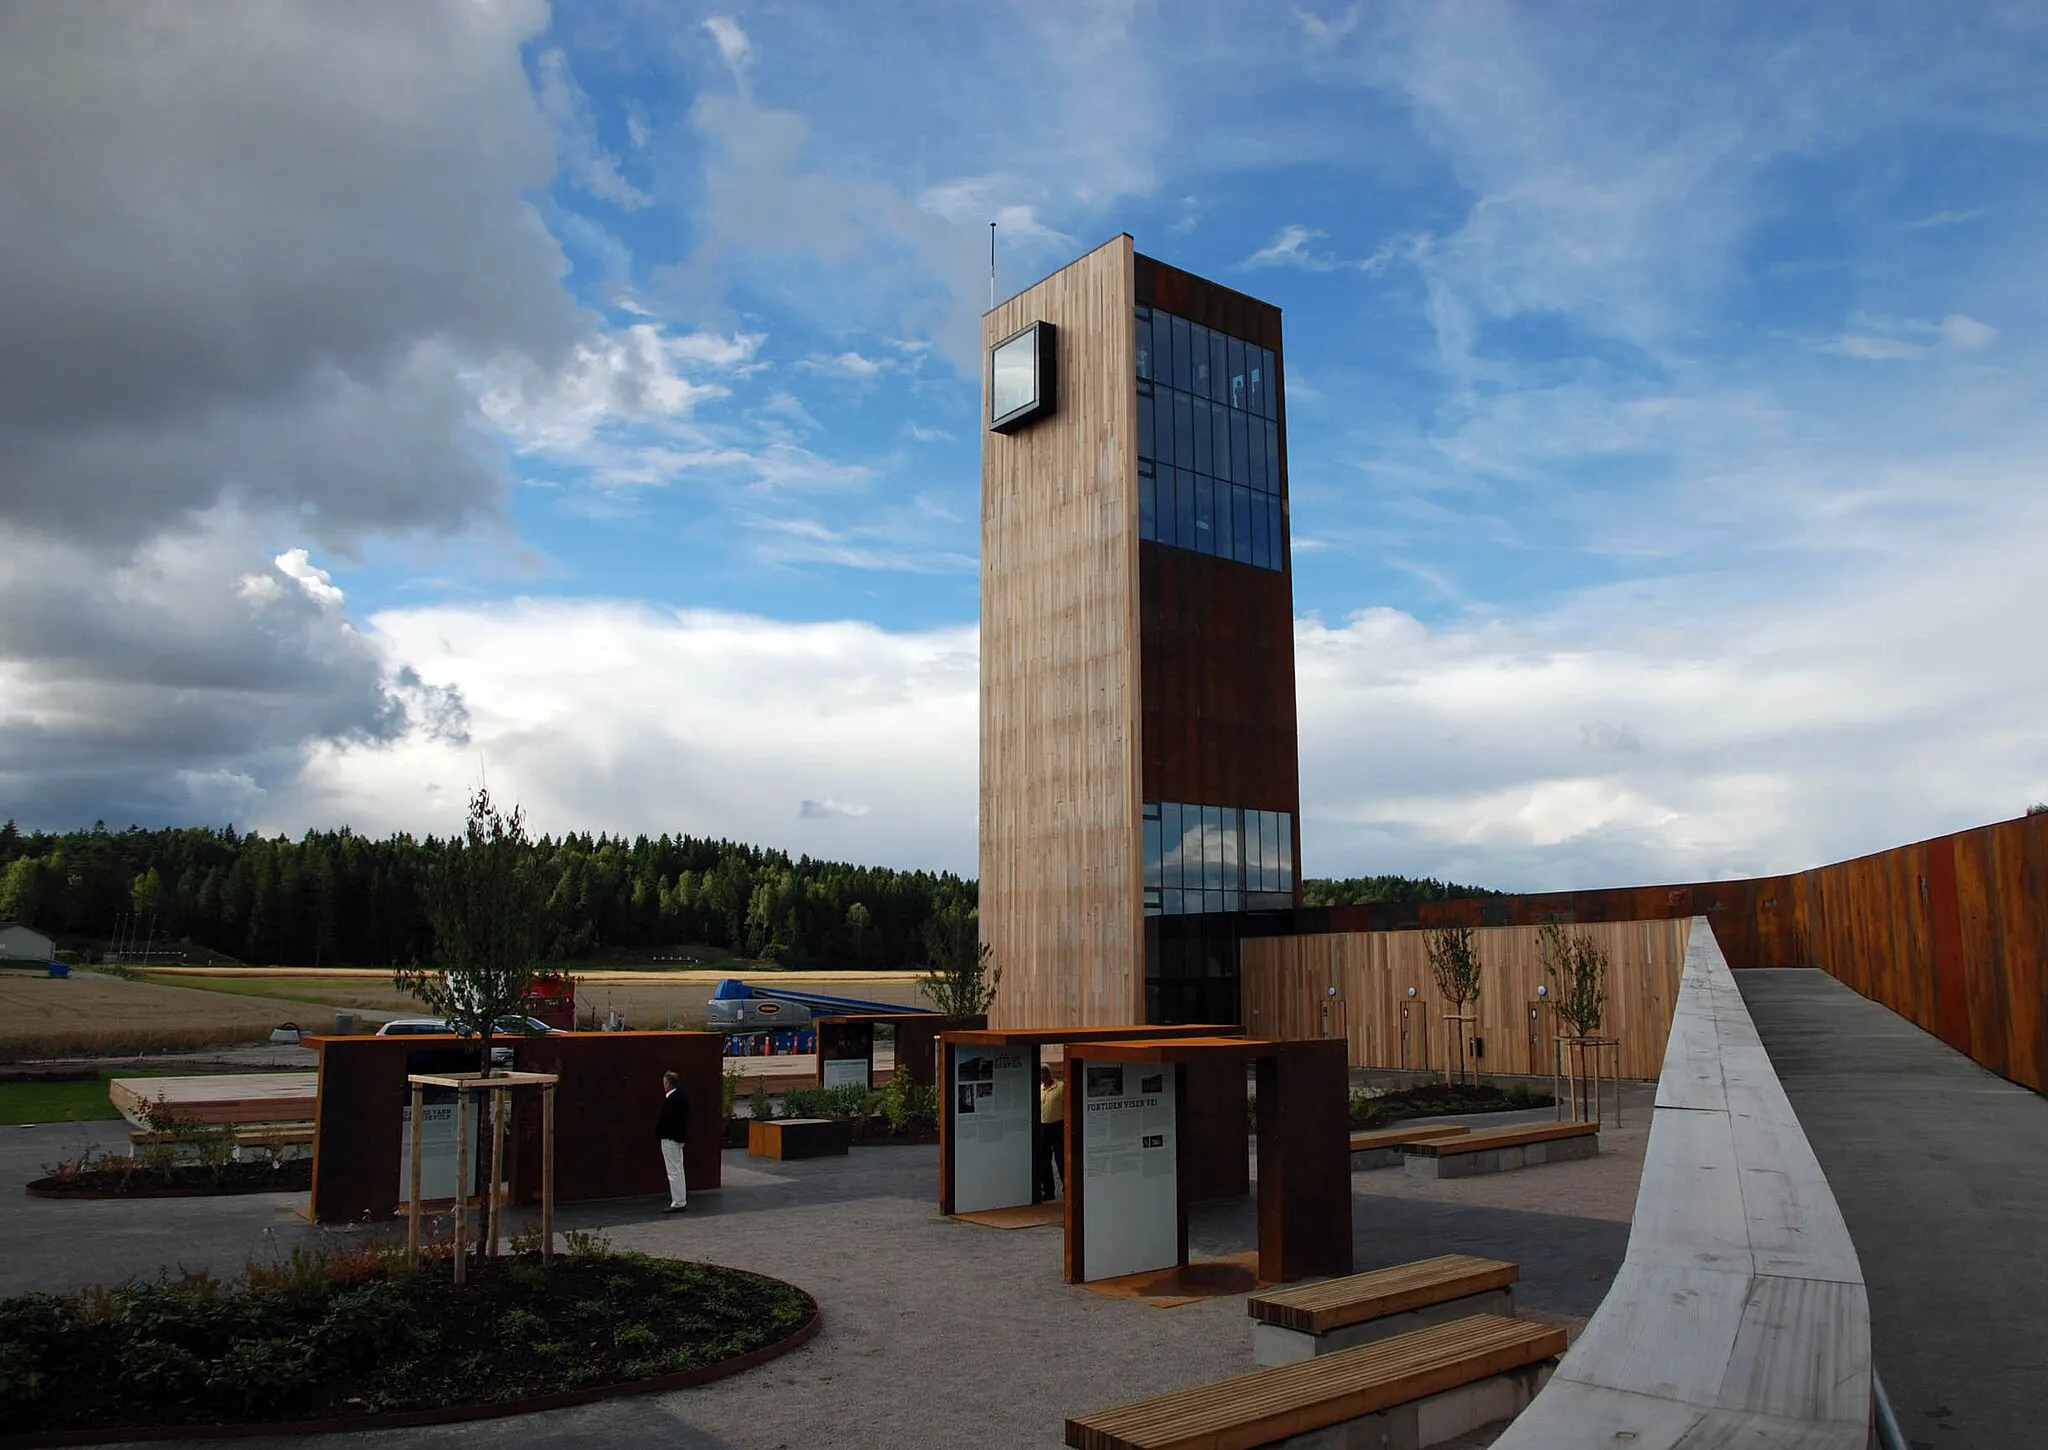 Photo showing: Solbergtårnet rasteplass is located at Skjeberg, in Sarpsborg, Norway and is a resting place for motorists using the European route E06. It was completed in 2010 and has won a local prize for good architecture.